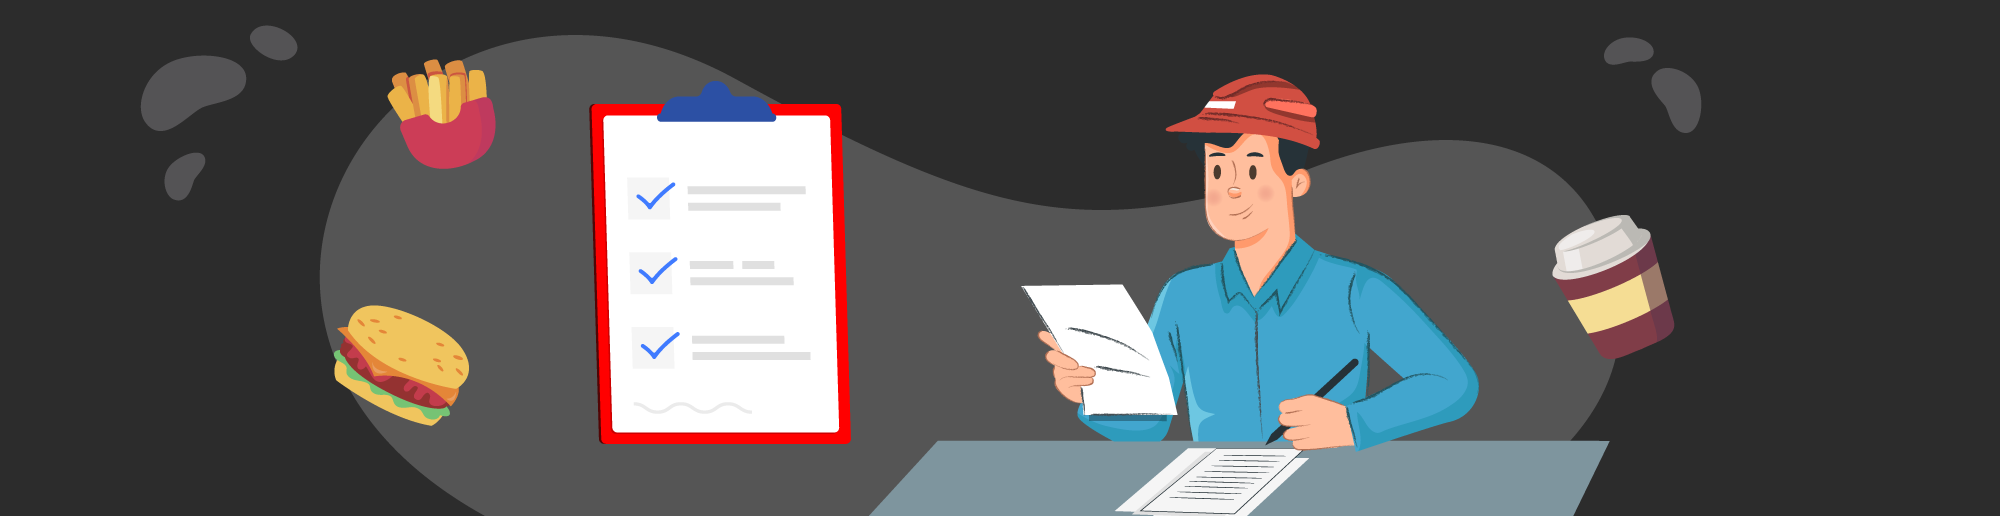 An Australis Localization translator who specializes in occupational safety and health projects works on the translation of process training for a fast food company. On his left side, you can see a picture of a hamburger and fries, and on his right side, a soft drink container.